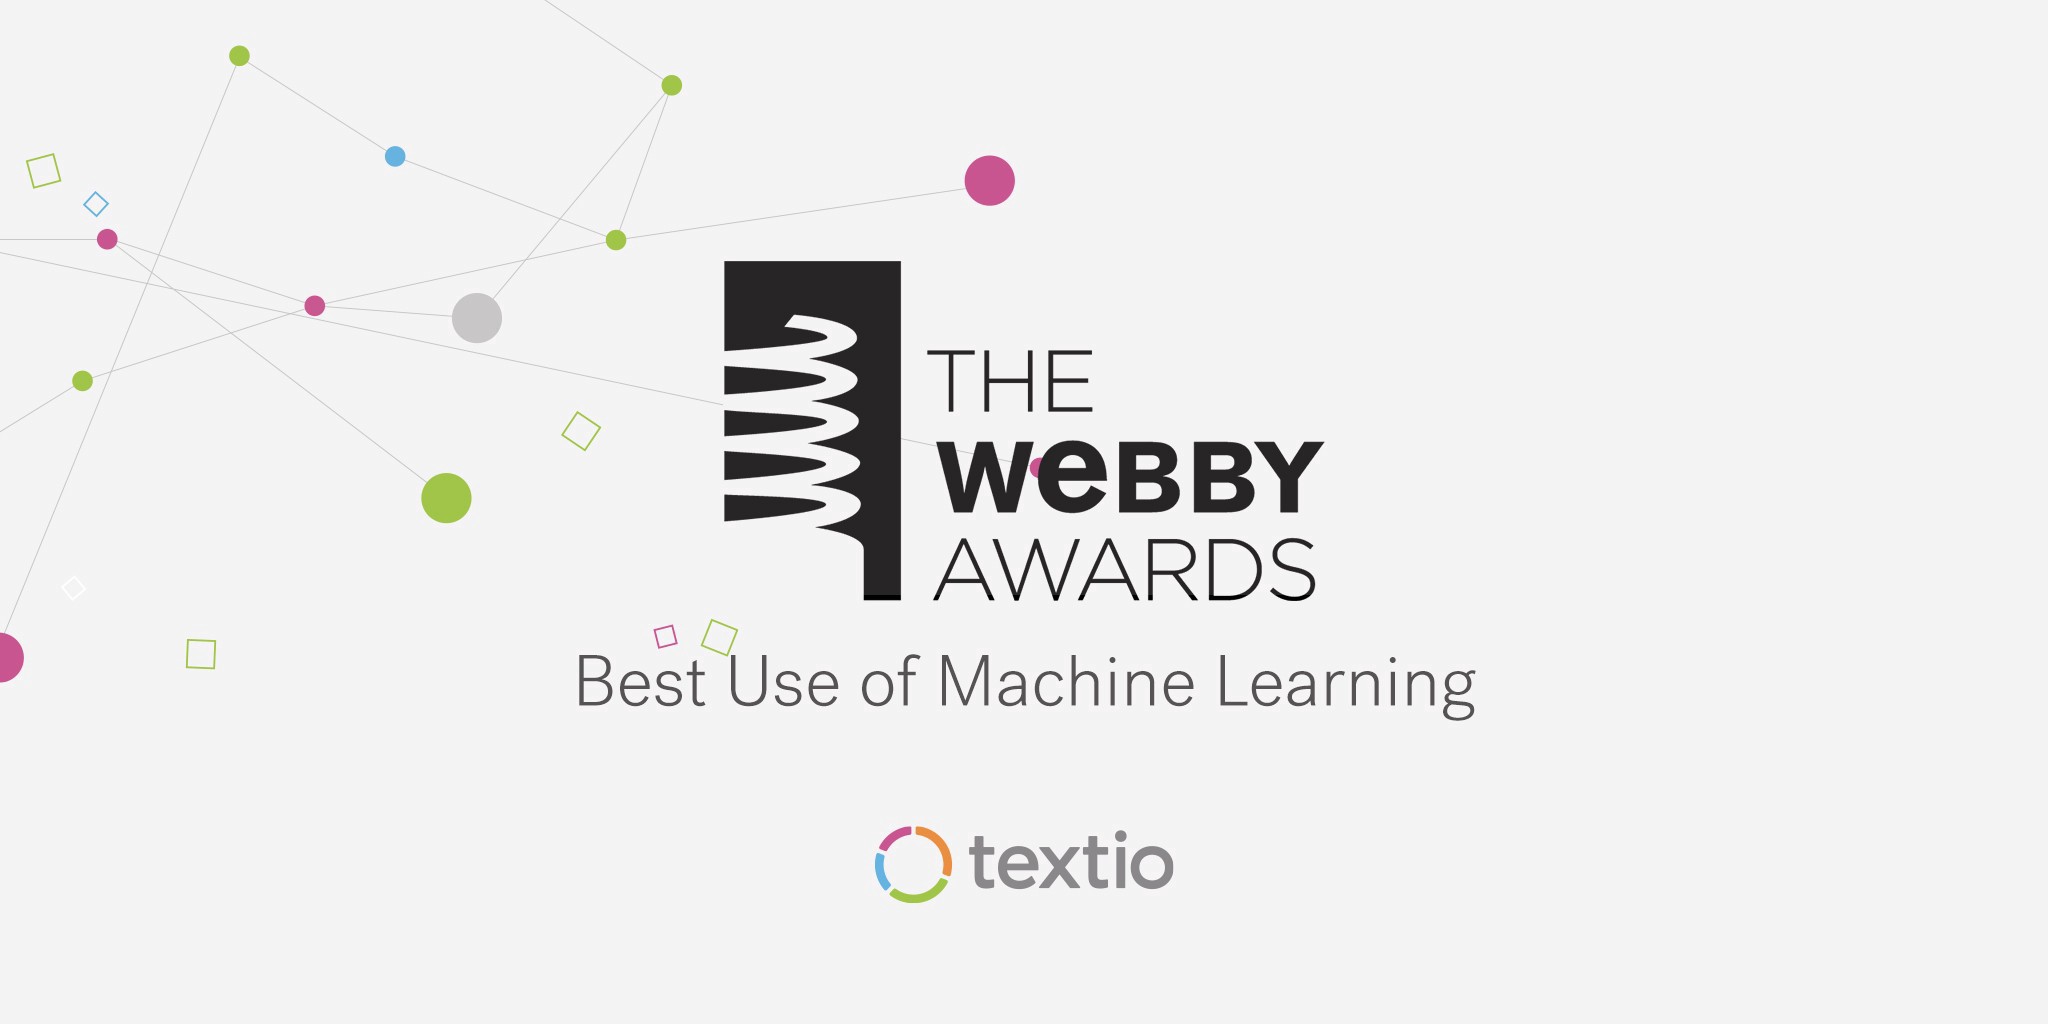 The webby awards best use of machine learning